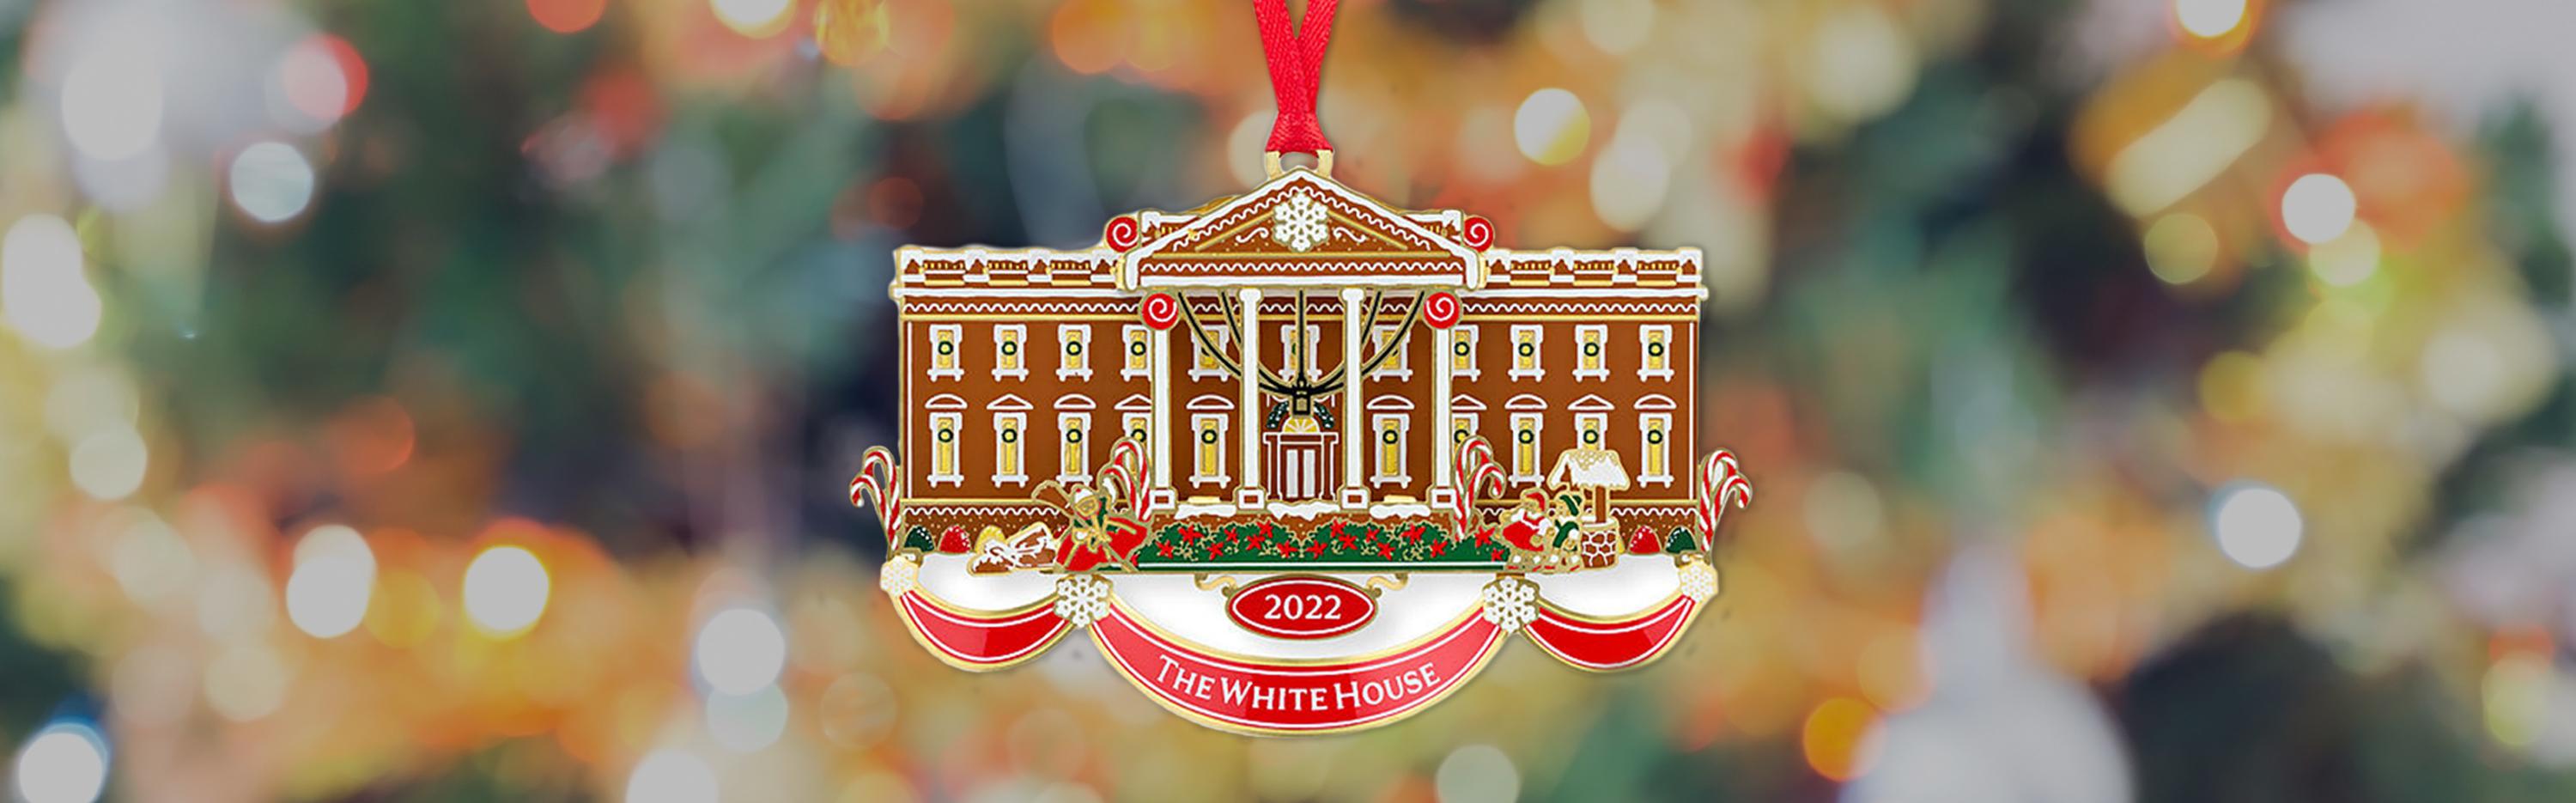 2022 White House Ornament at Home Depot